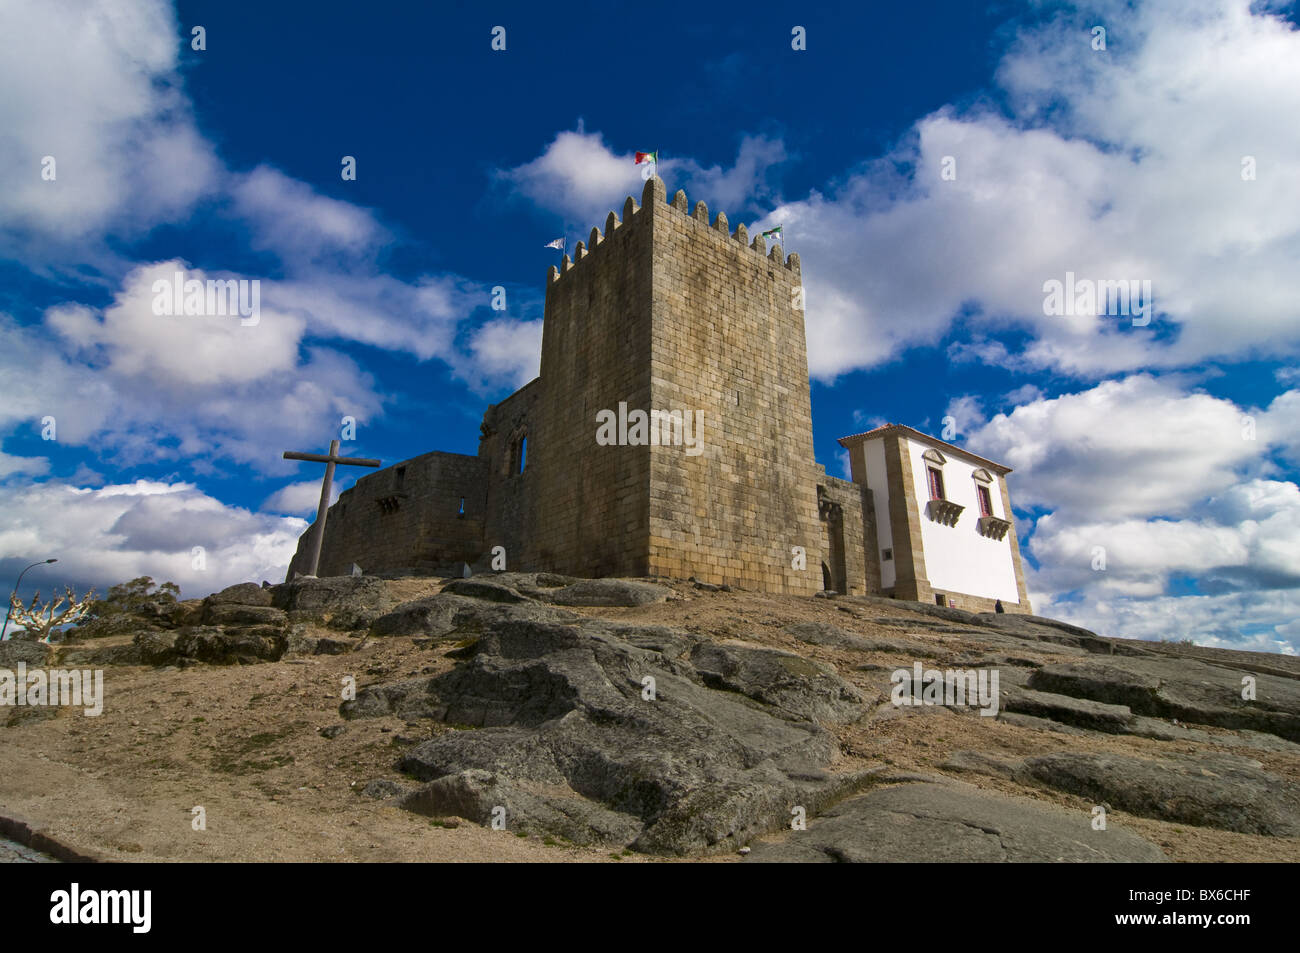 The old castle of Belmonte, Portugal, Europe Stock Photo